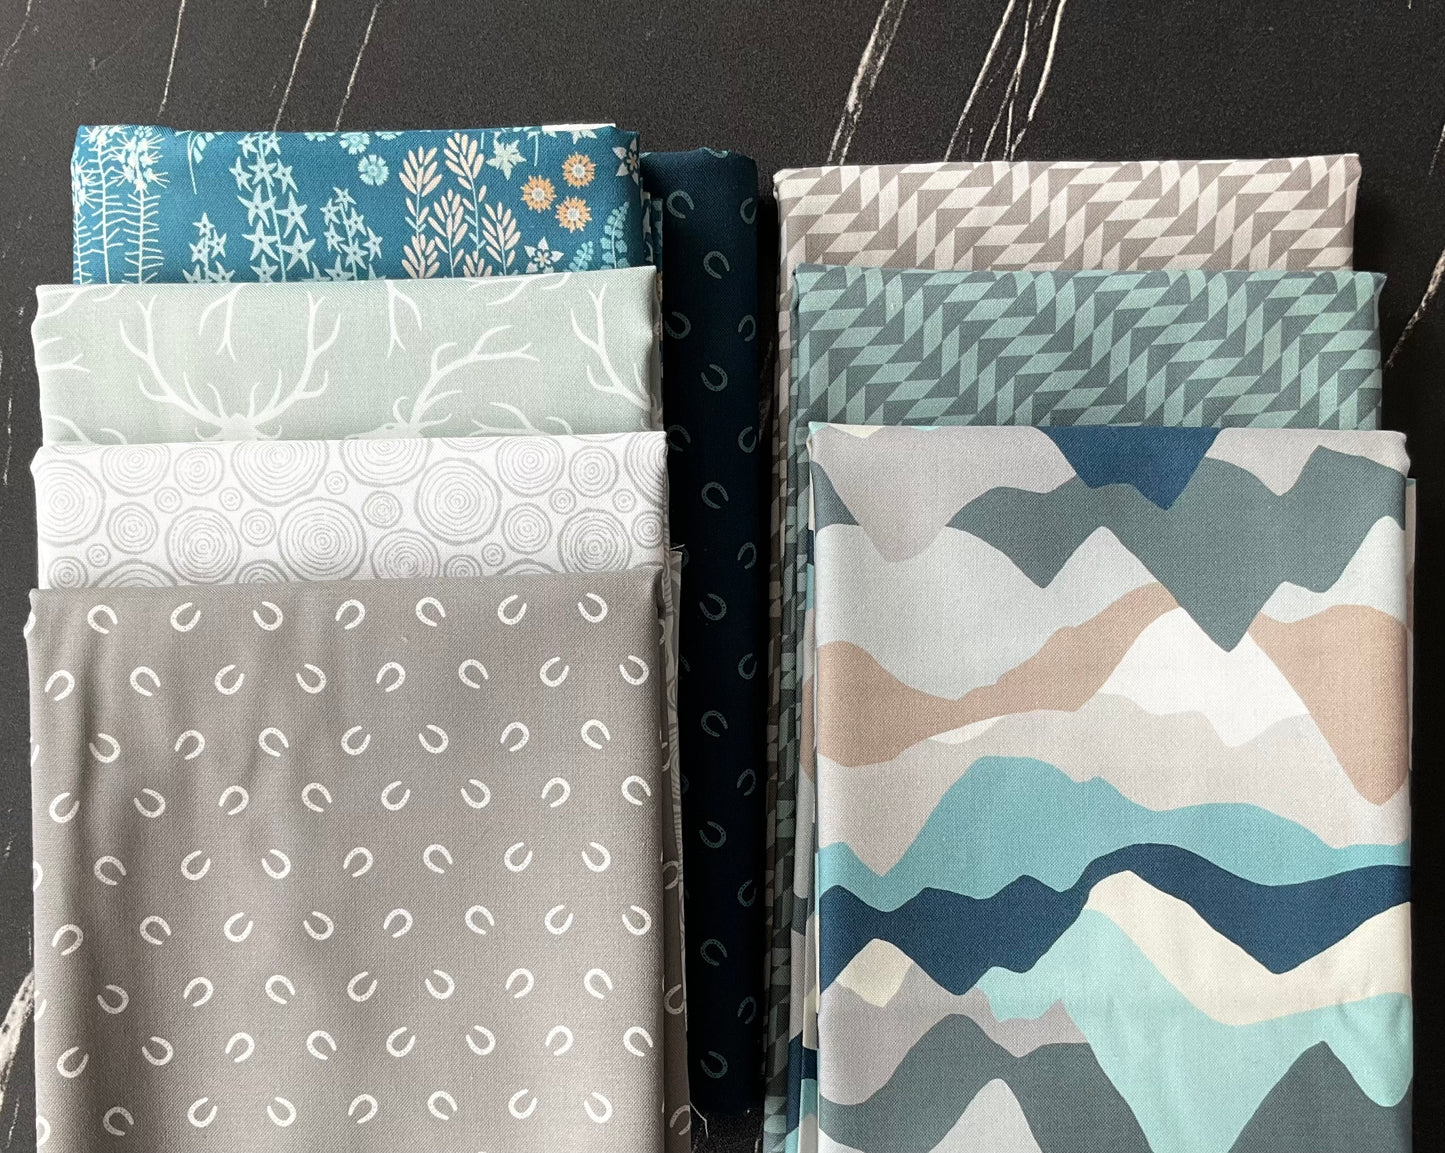 Cascadia Quilt featuring Horizon by Pippa Shaw : Quilt Kit